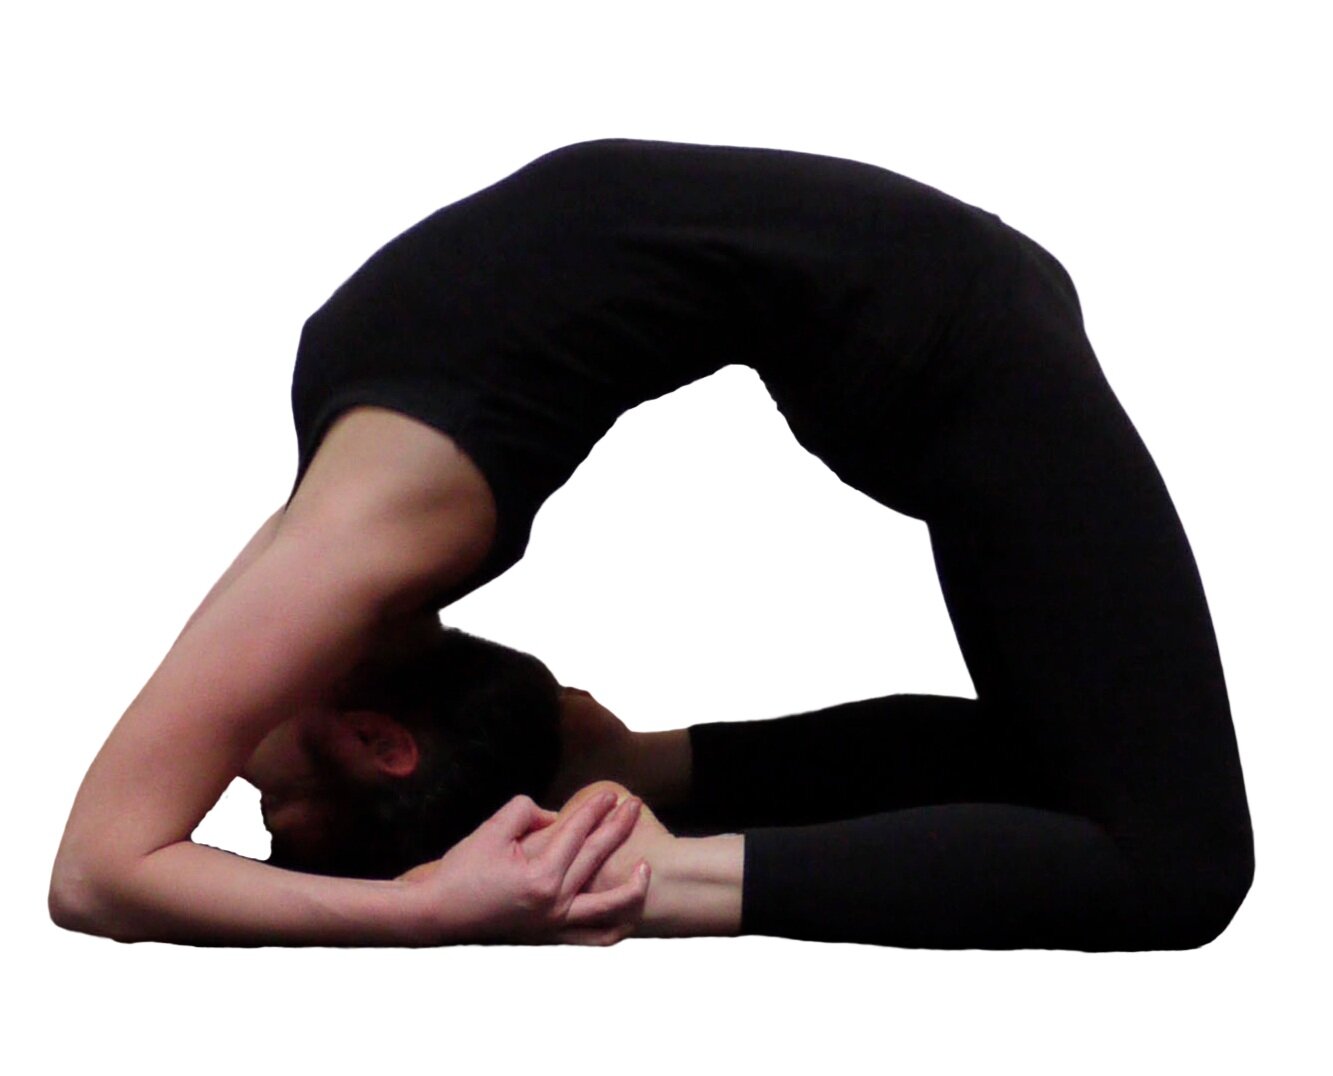 7 Yoga Poses That Can Naturally Help Keep You Warm And Fight The Cold